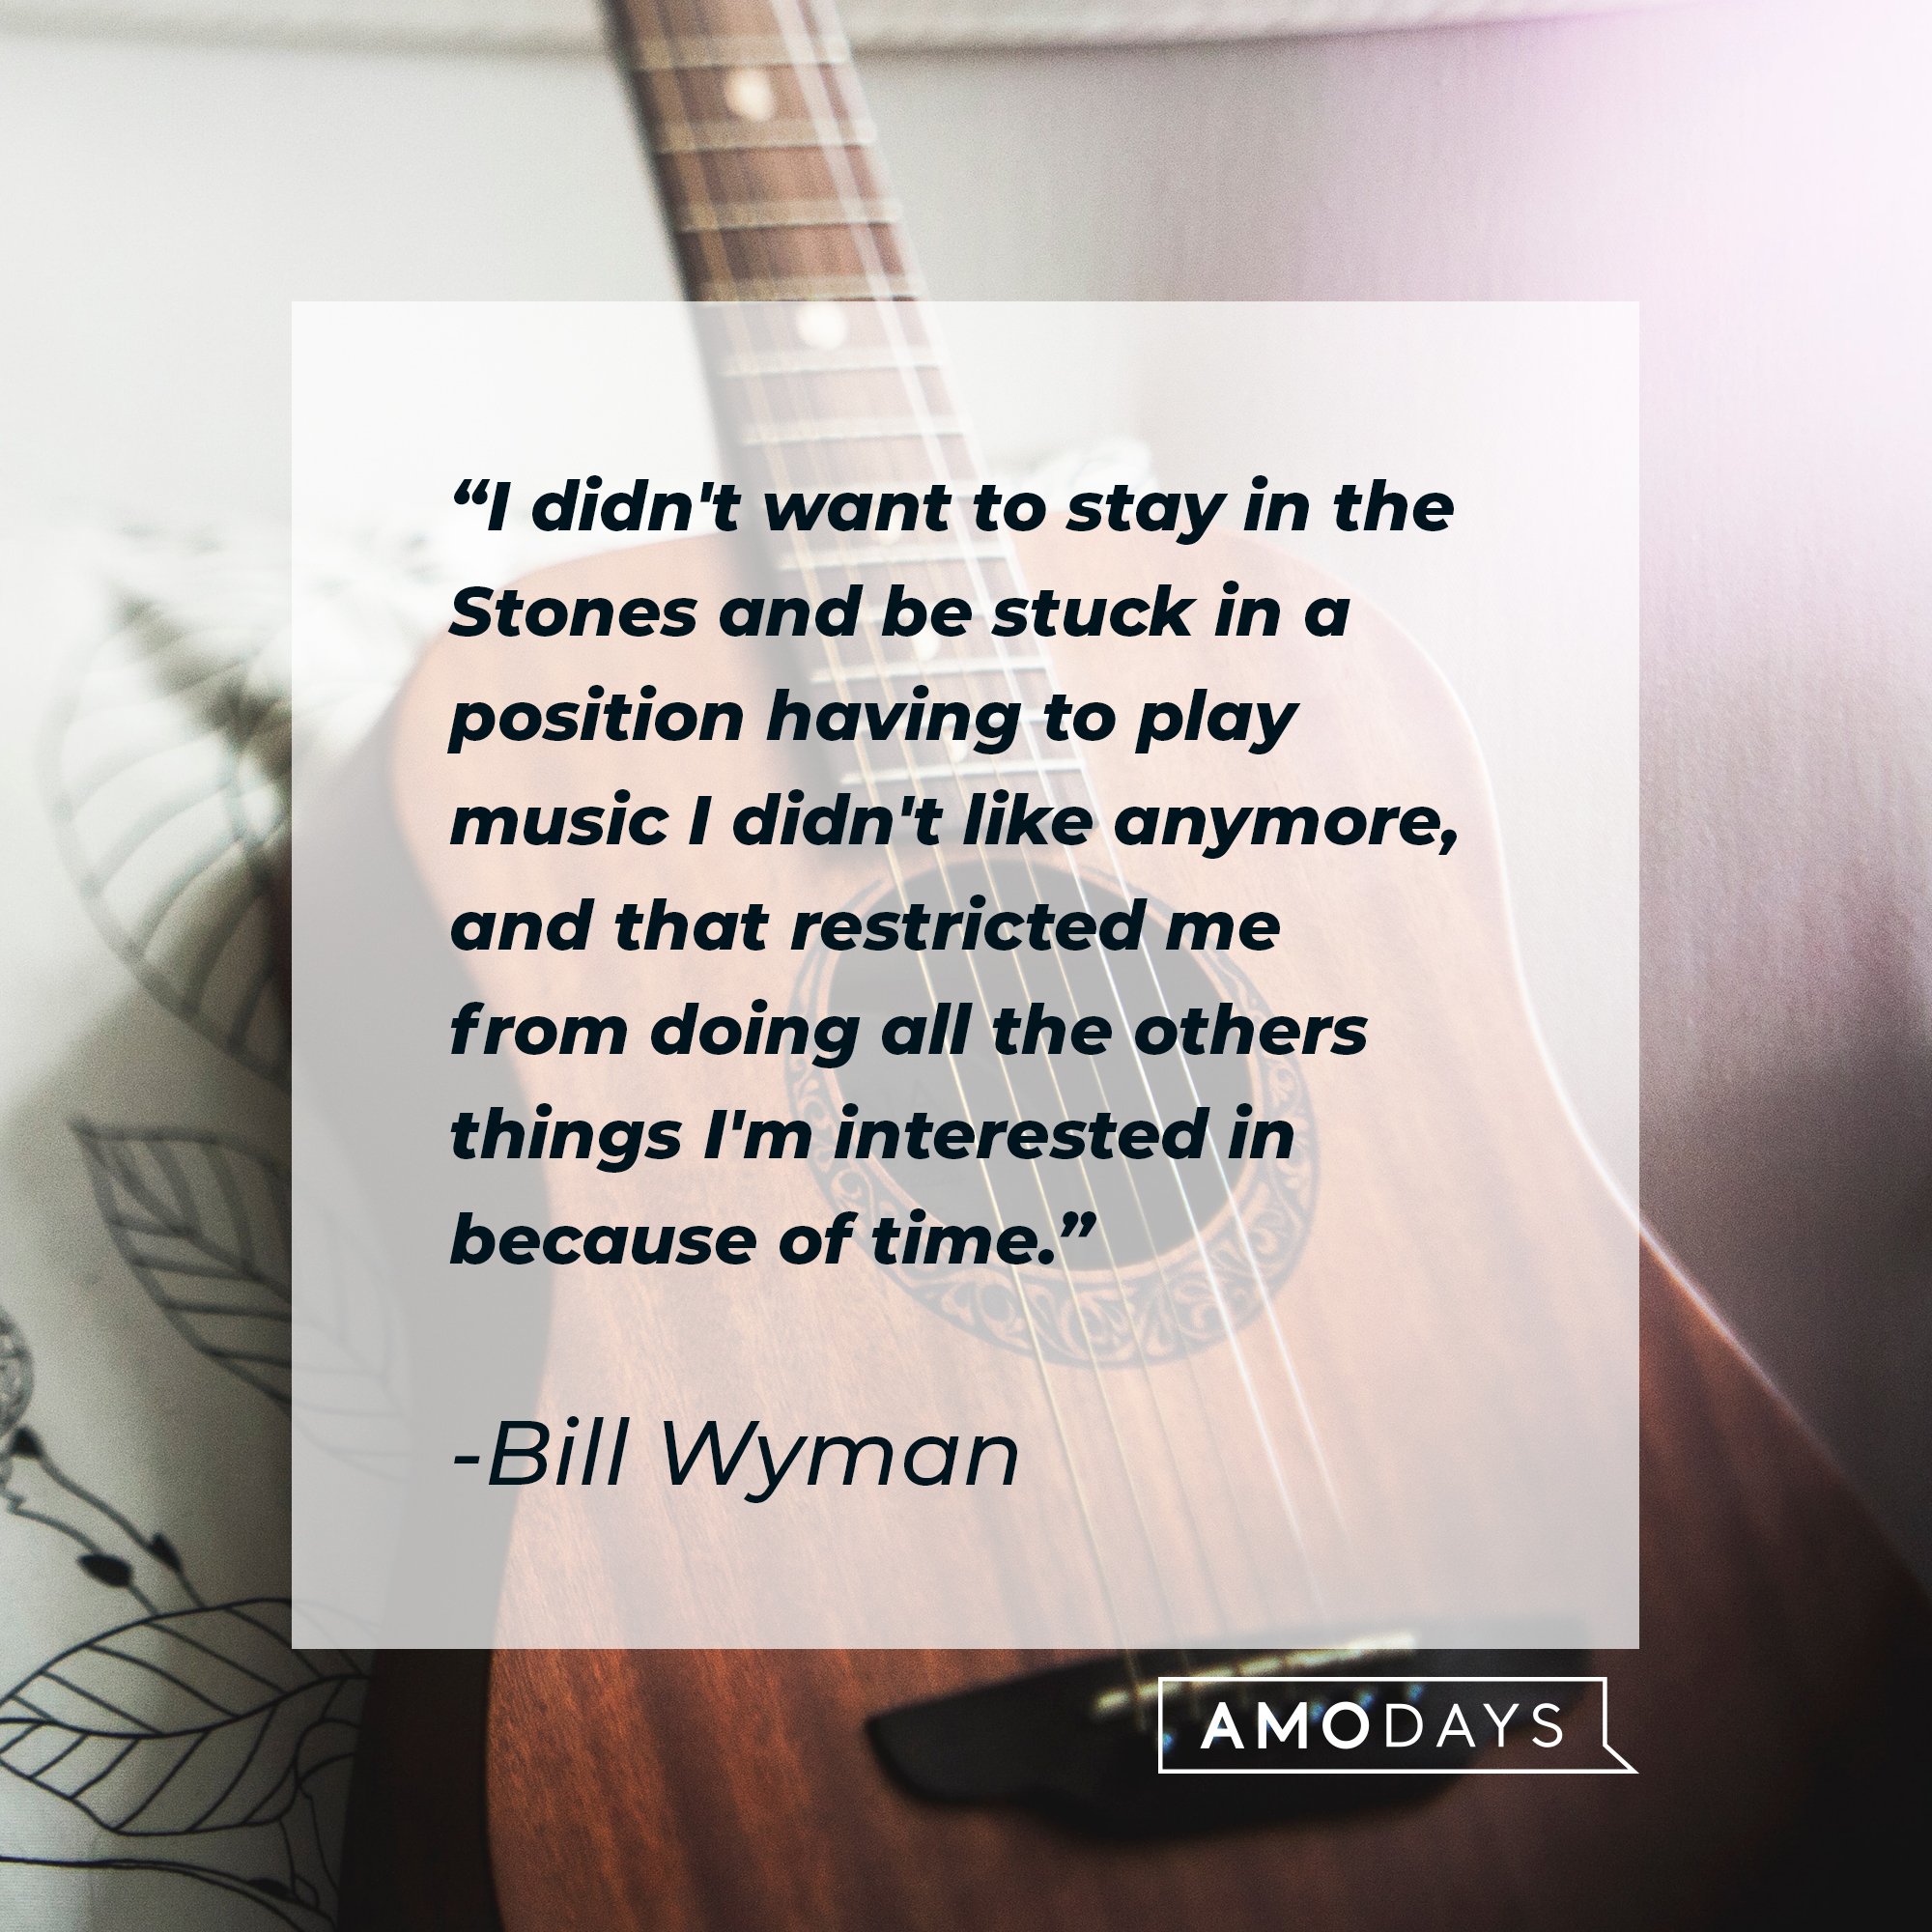 Bill Wyman’s quote: "I didn't want to stay in the Stones and be stuck in a position having to play music I didn't like anymore, and that restricted me from doing all the others things I'm interested in because of time."  | Image: AmoDays